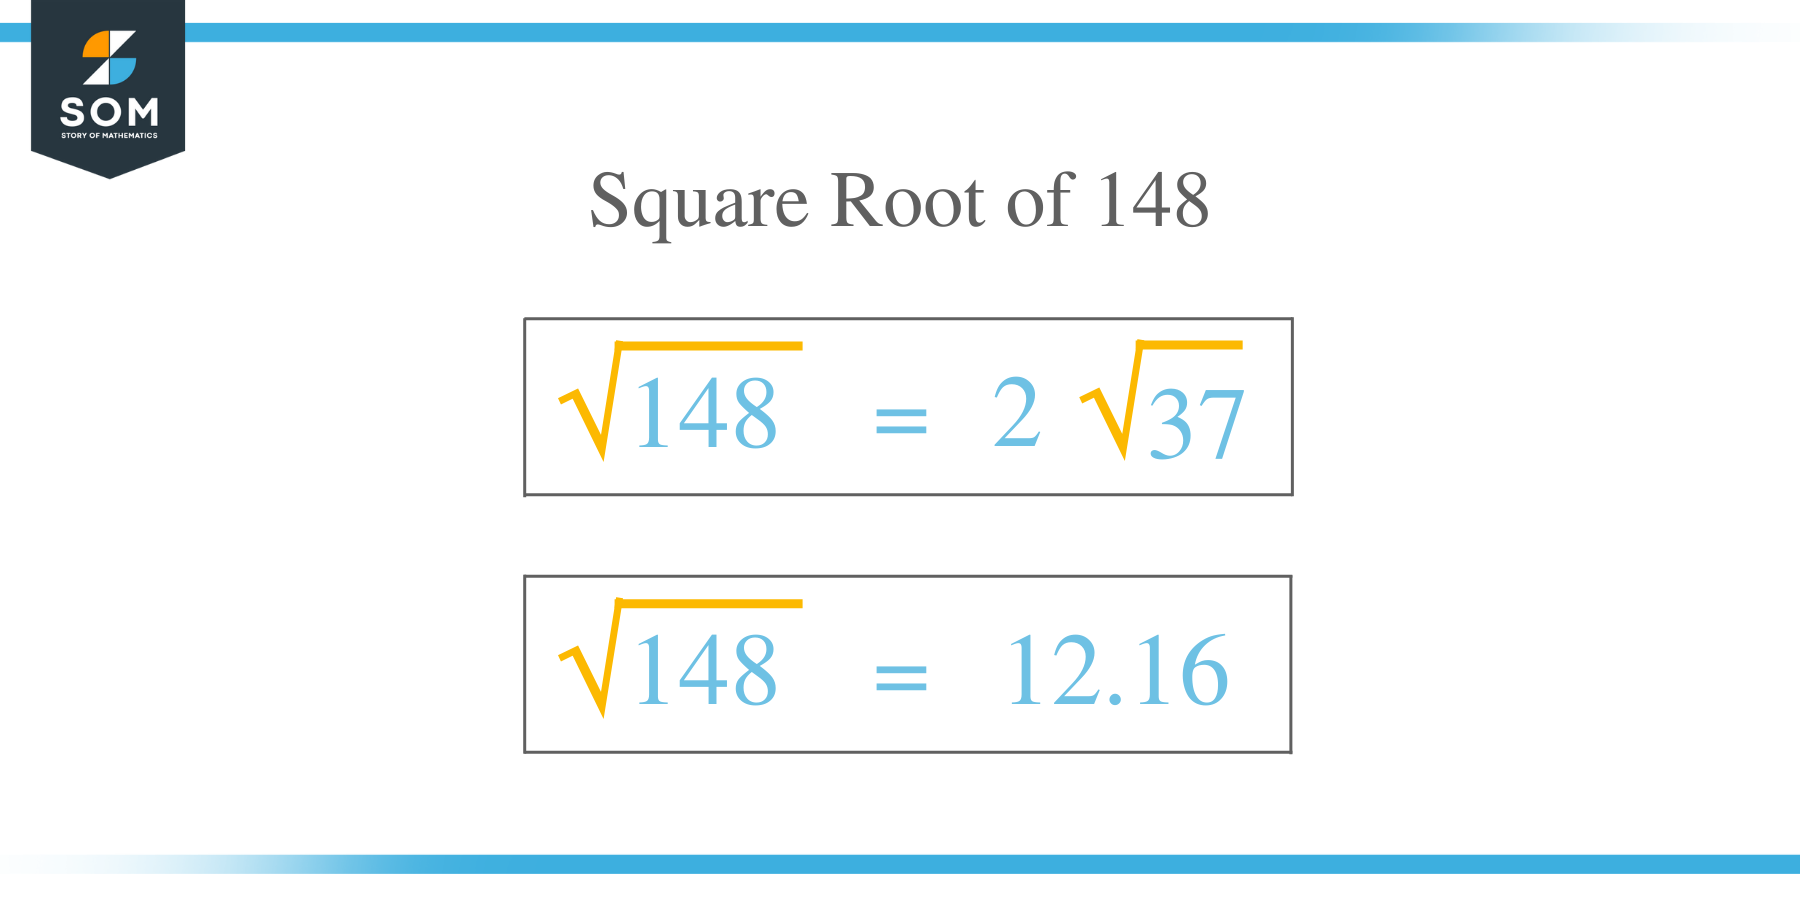 Square Root of 148